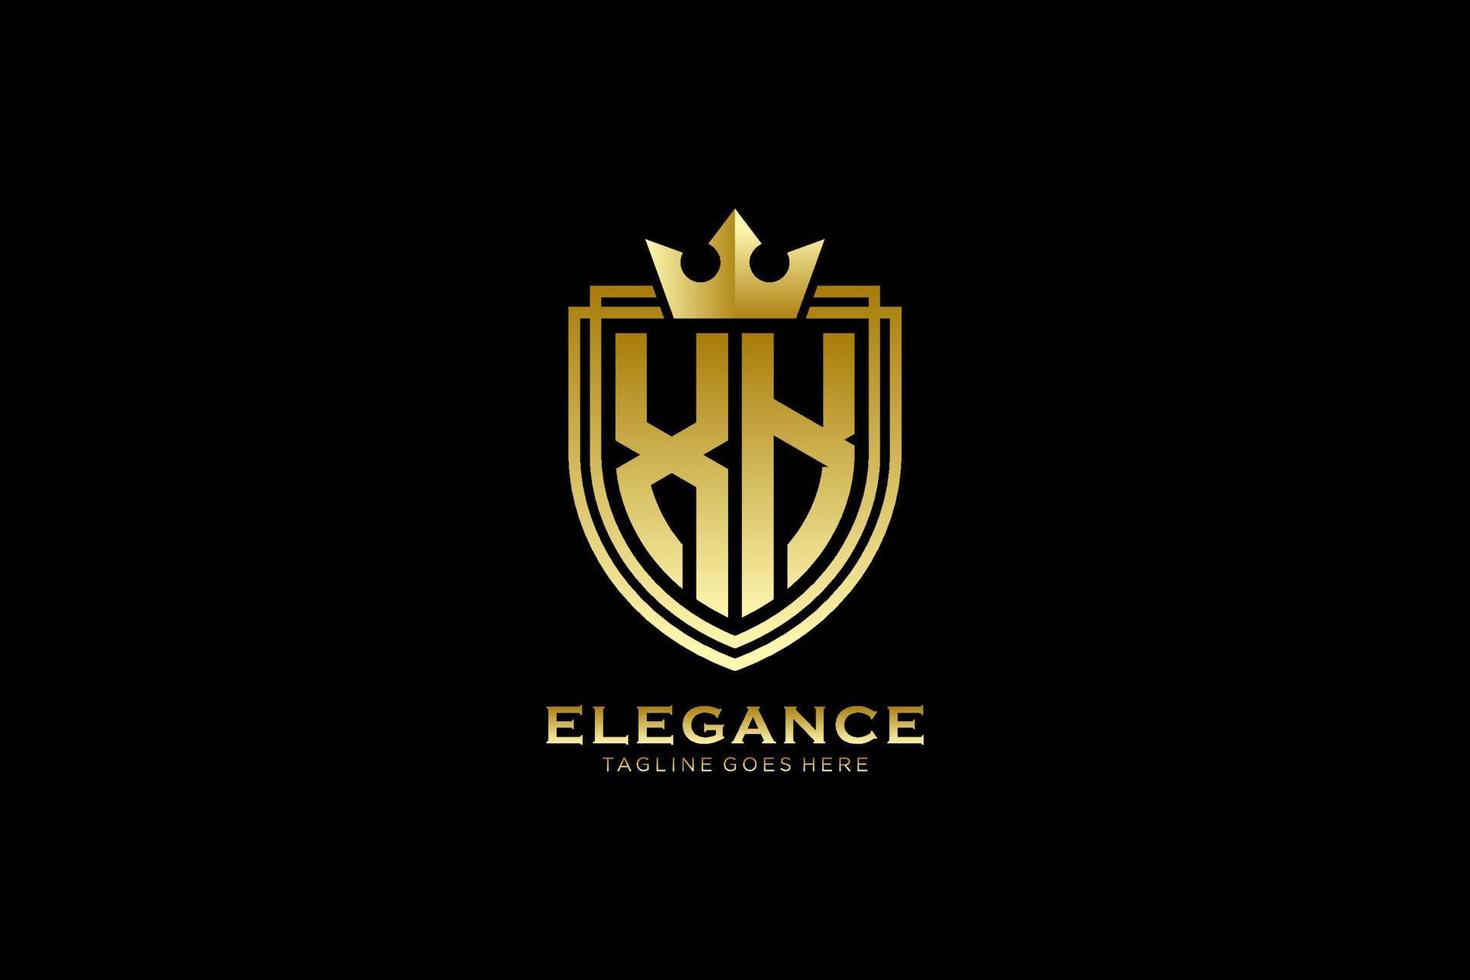 initial XK elegant luxury monogram logo or badge template with scrolls and royal crown - perfect for luxurious branding projects vector